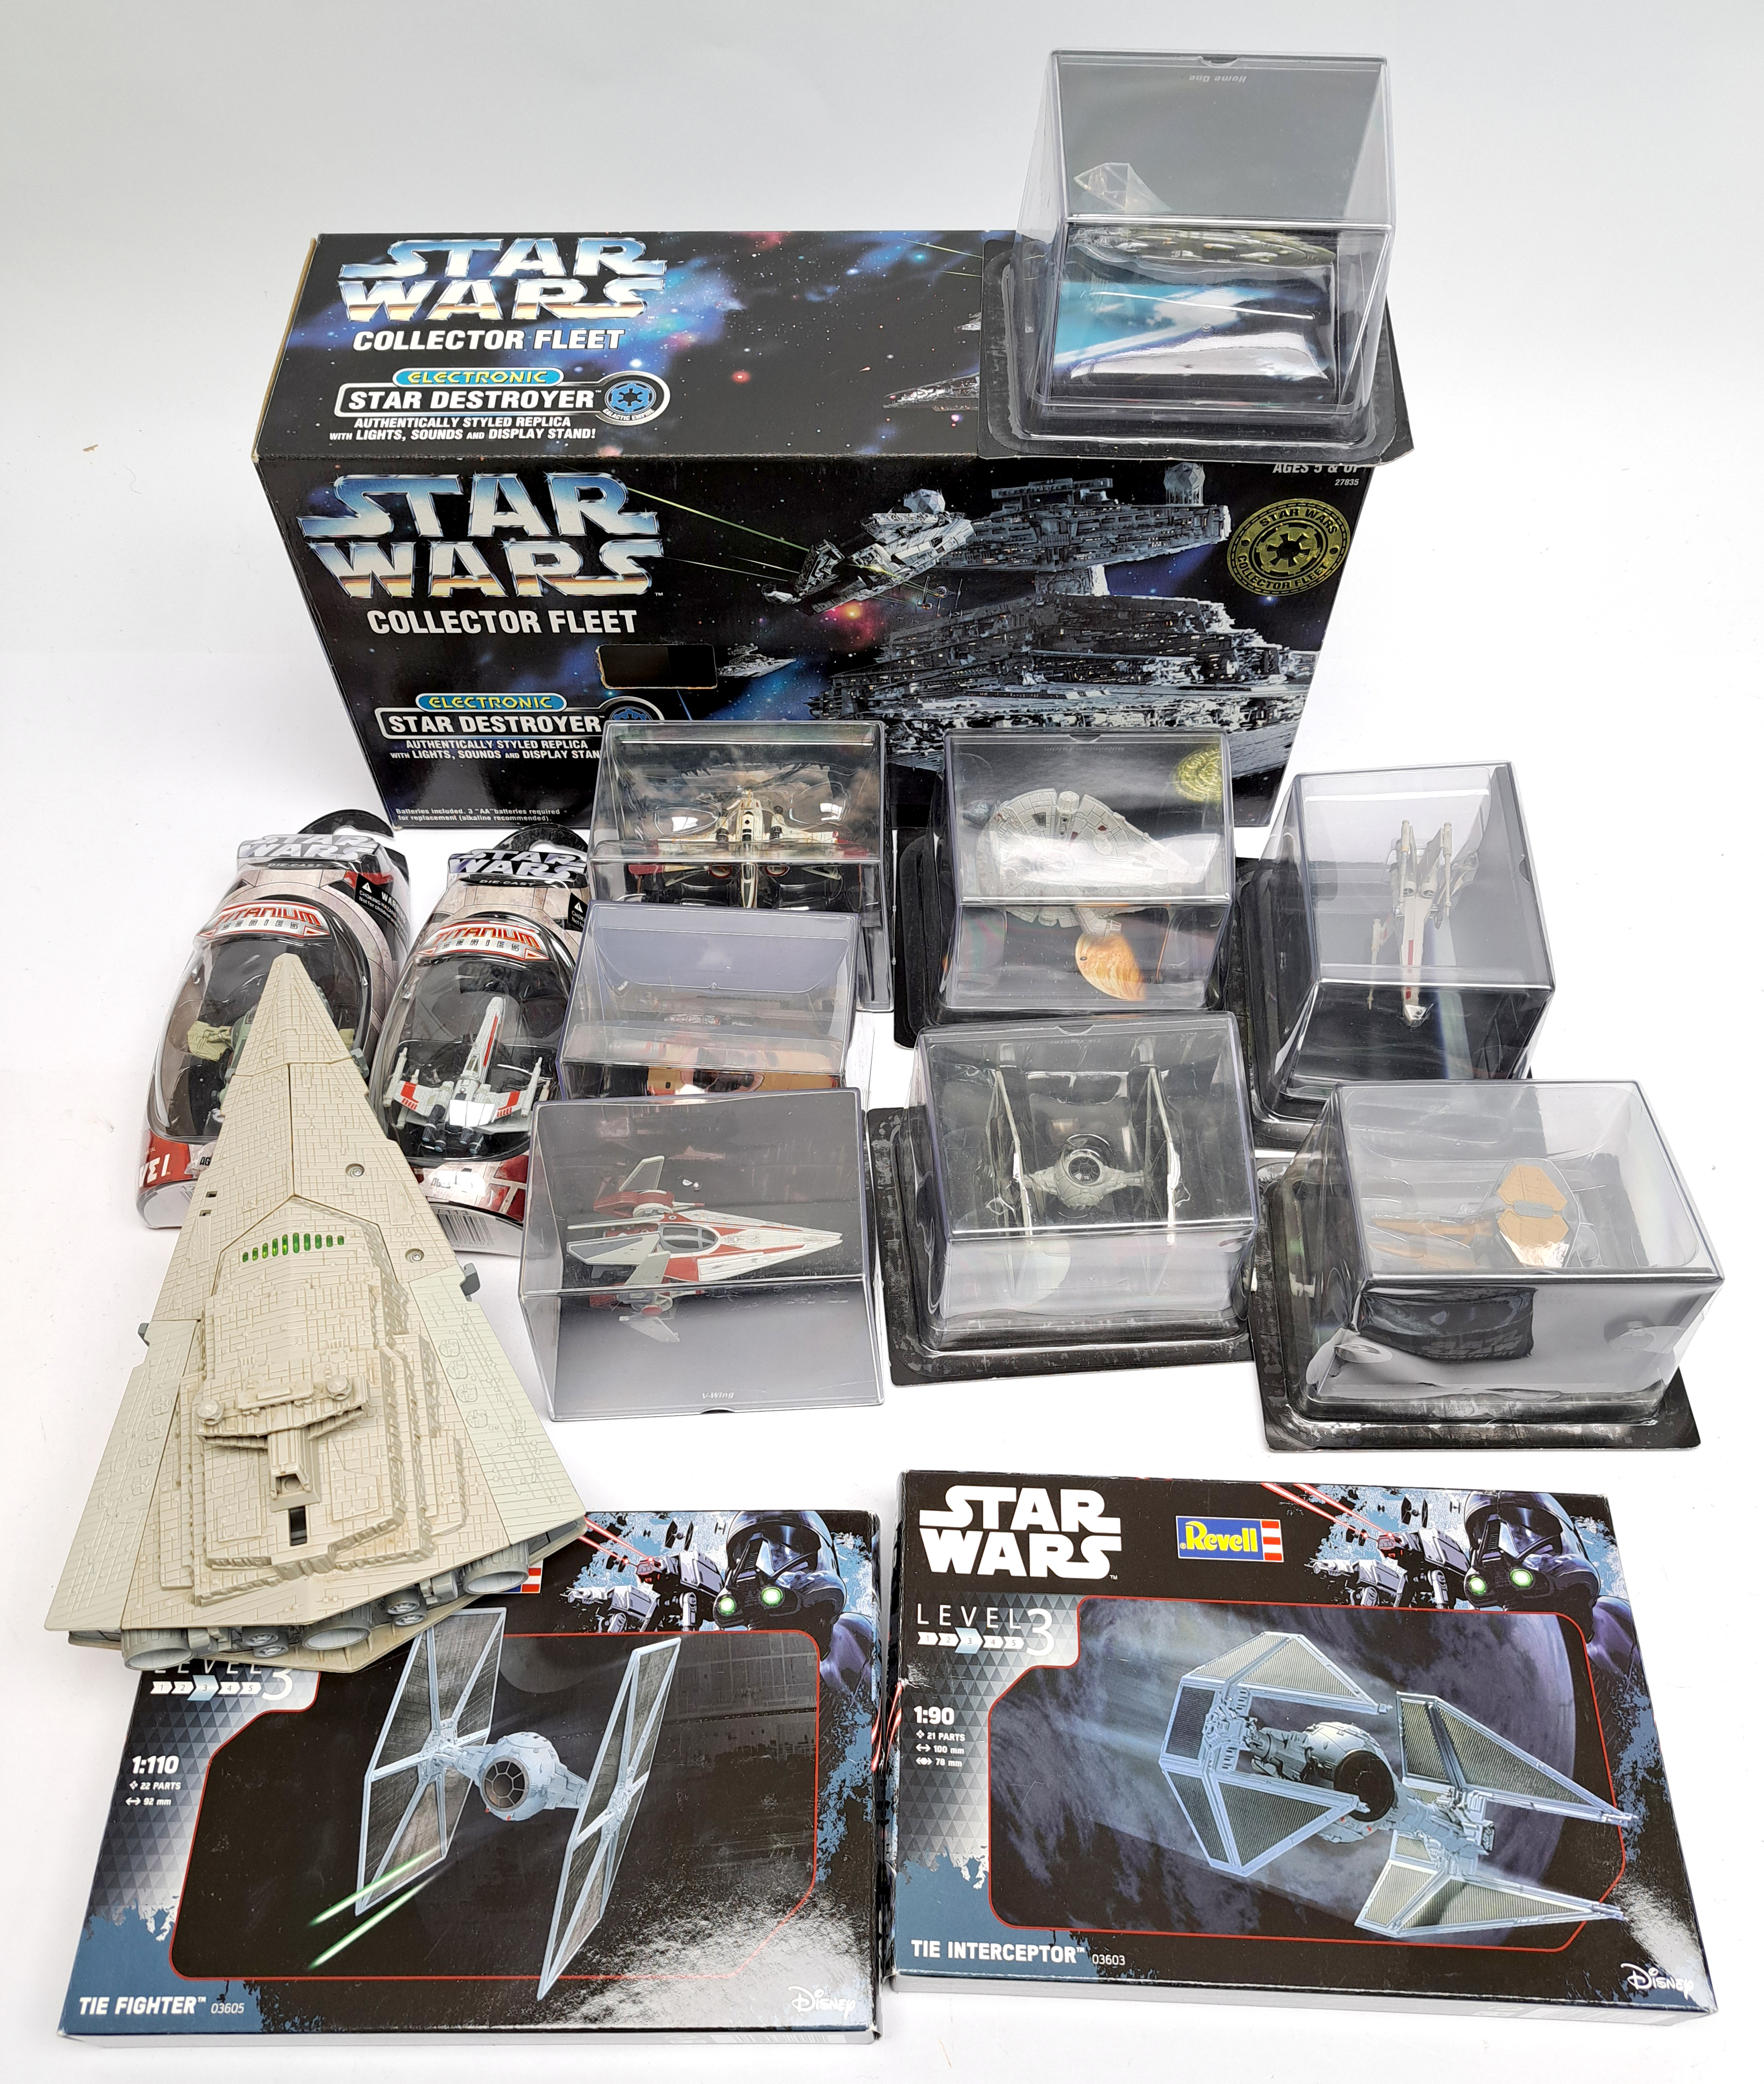 Kenner, Revell, De Agostini Star Wars mixed lot of model ships. Good to excellent.